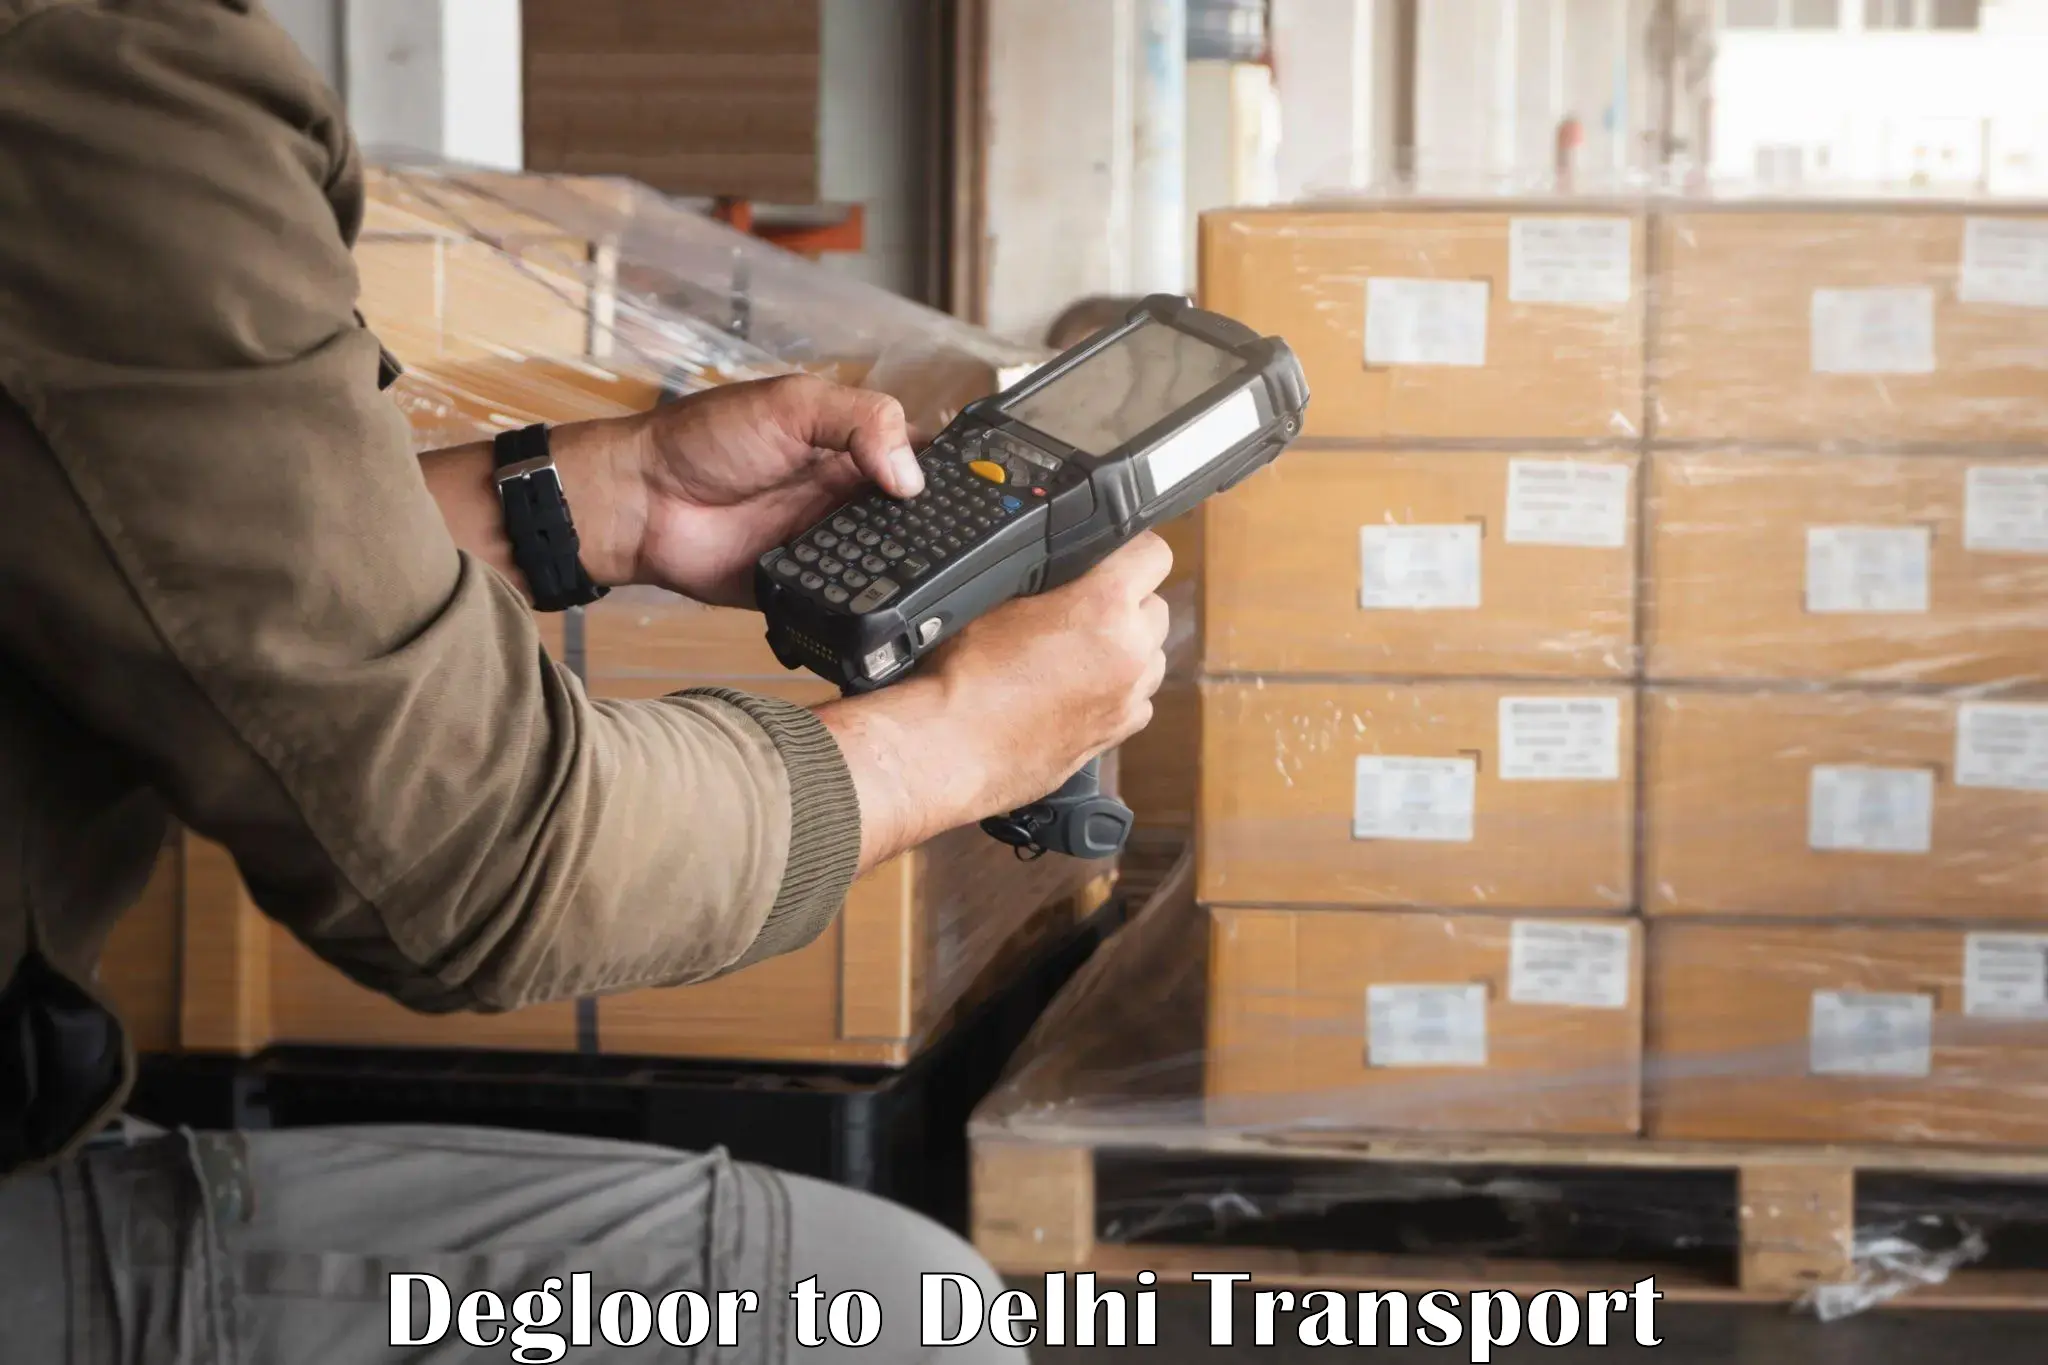 Pick up transport service Degloor to Lodhi Road